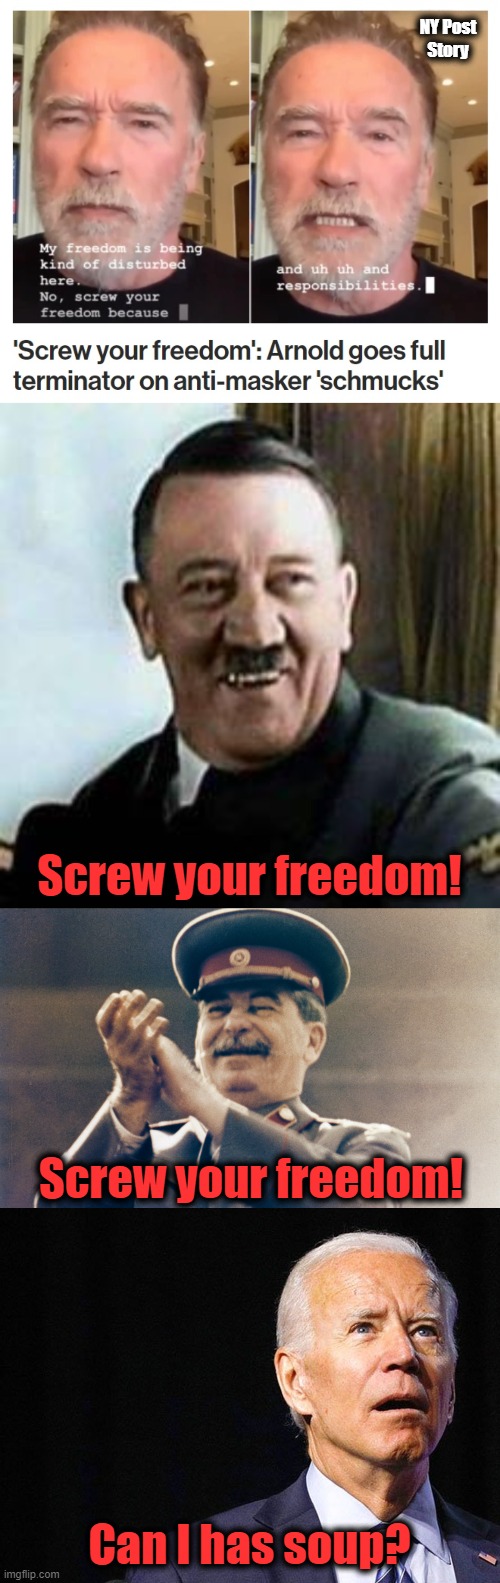 Screw your freedom! | NY Post
Story; Screw your freedom! Screw your freedom! Can I has soup? | image tagged in laughing hitler,joe biden confused,laughing stalin,arnold schwarzenegger,screw your freedom,mask mandates | made w/ Imgflip meme maker